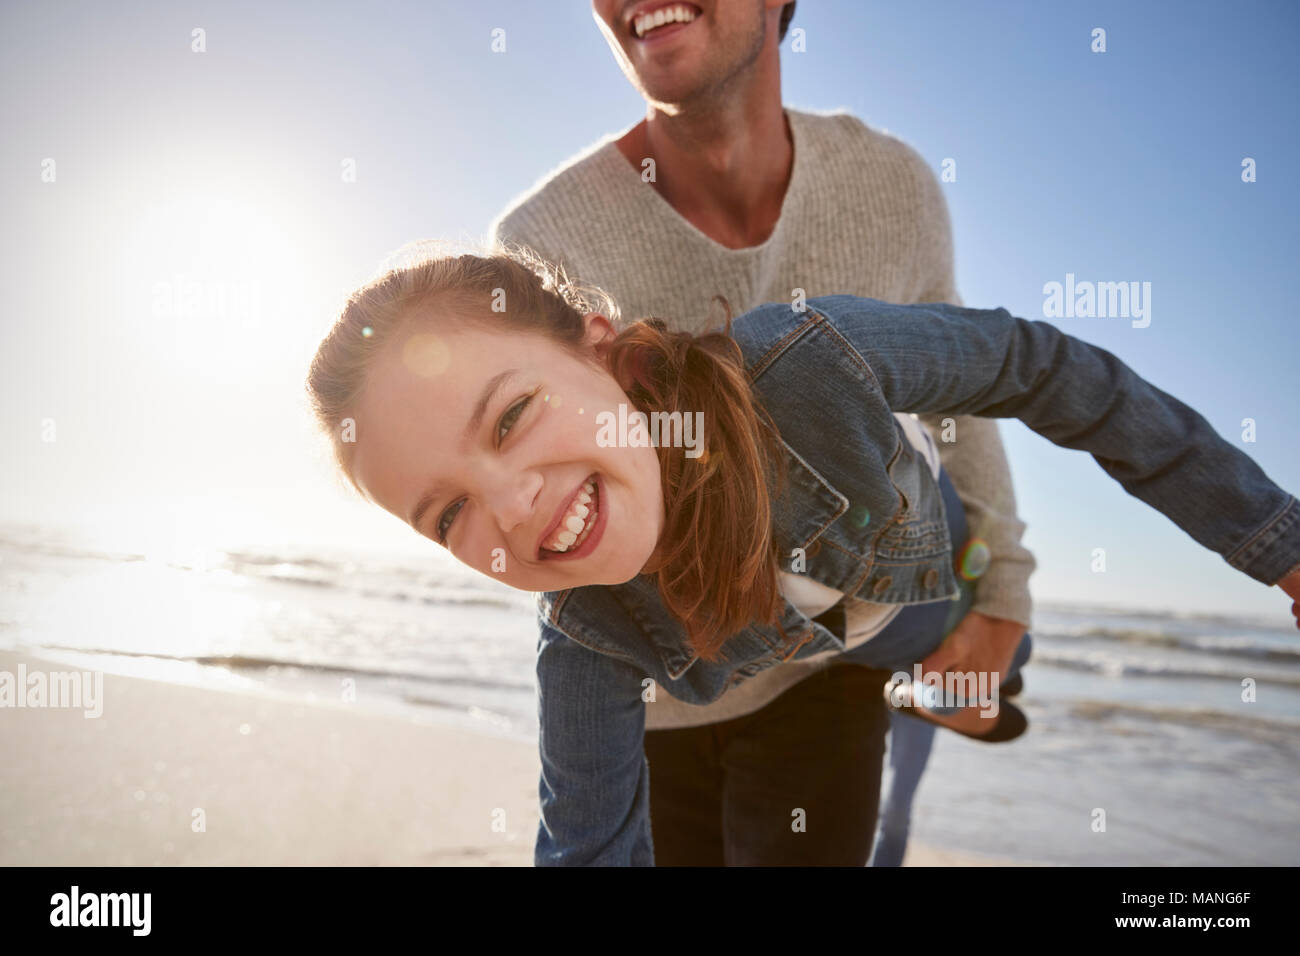 Father With Daughter Having Fun On Winter Beach Together Stock Photo